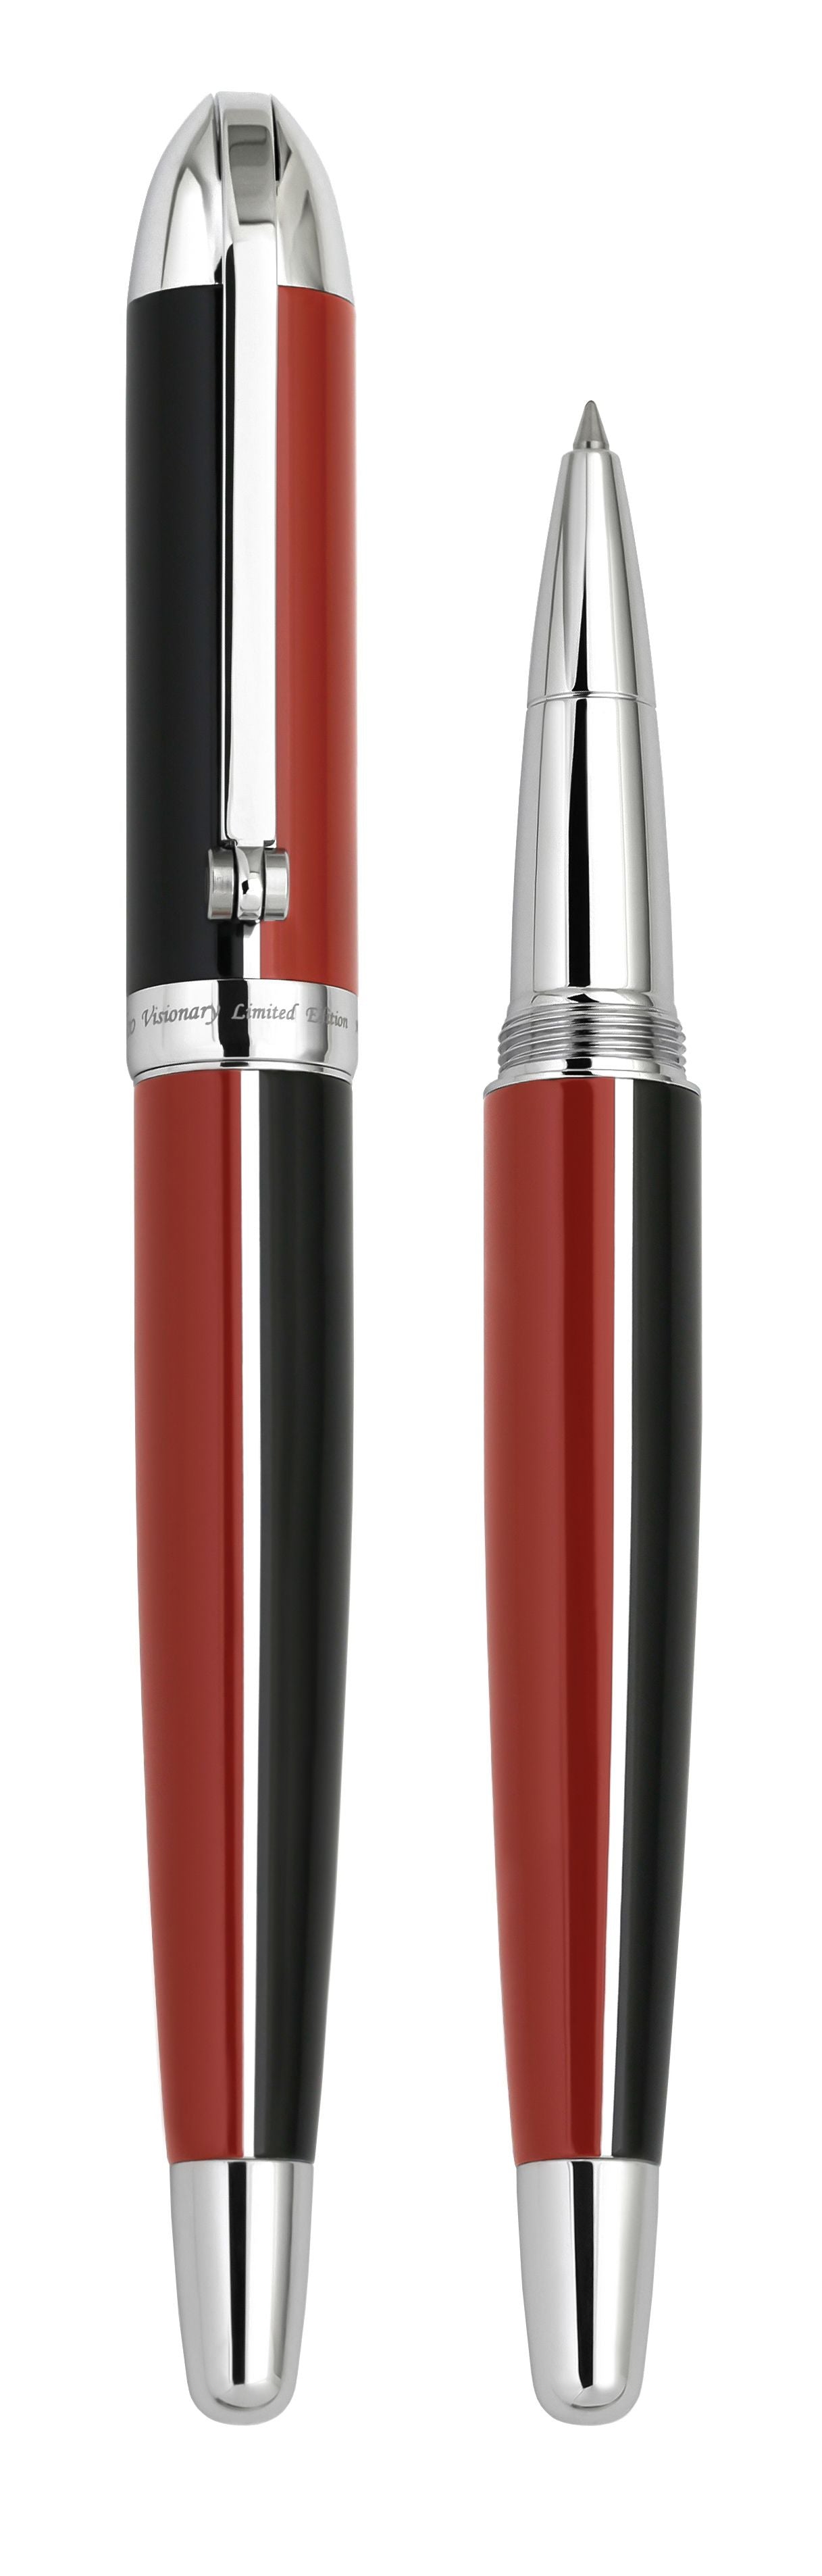 PERZOE Automotive Special Touch-Up Pen Pearl White Red Black